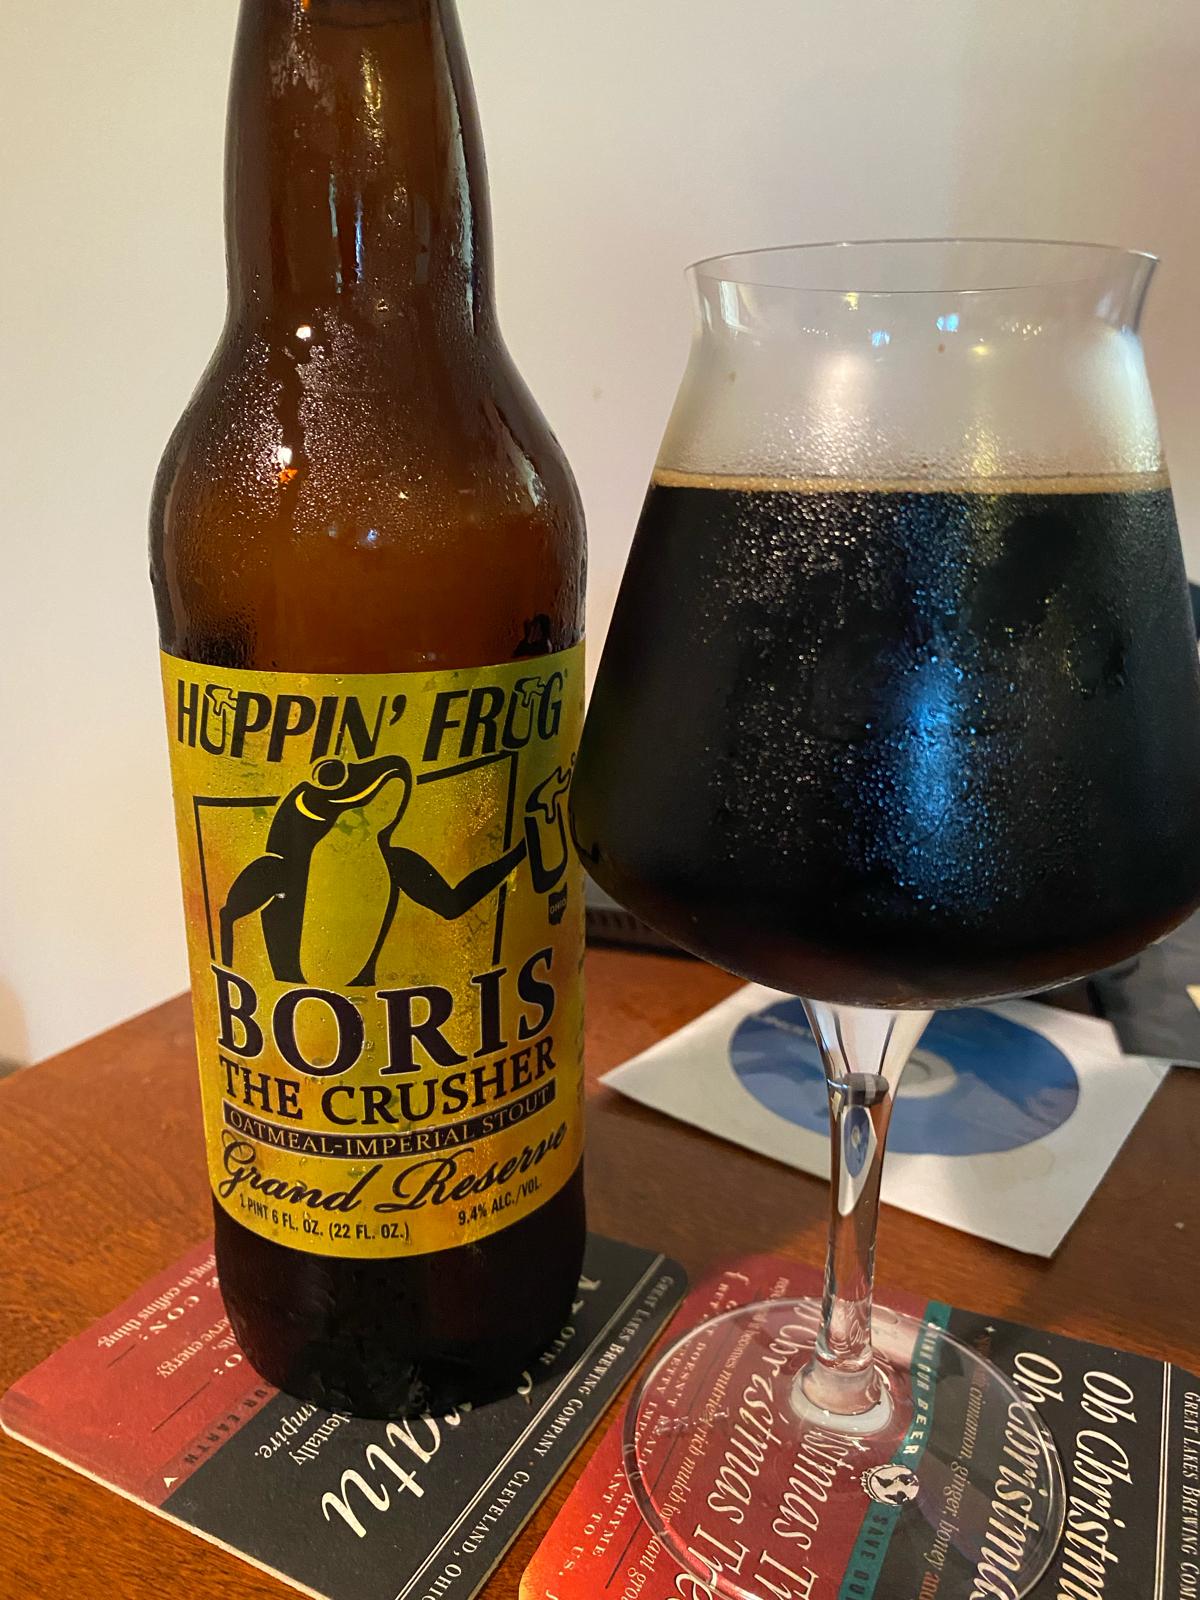 B.O.R.I.S. The Crusher Oatmeal Imperial Stout Grand Reserve